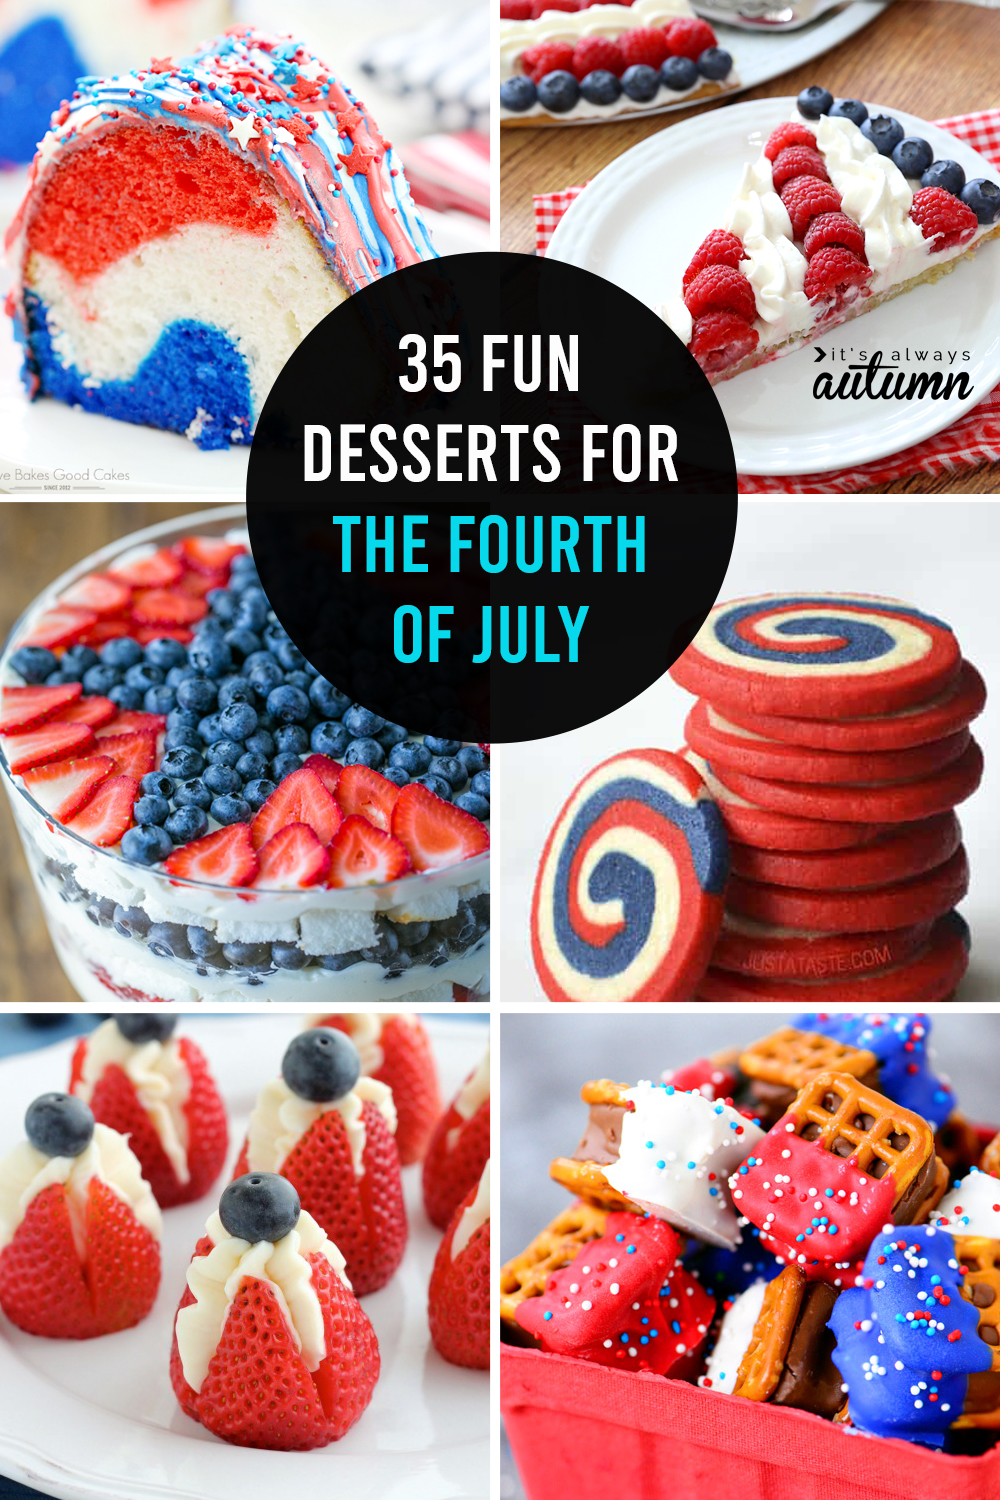 35 red, white and blue desserts for the 4th of July!